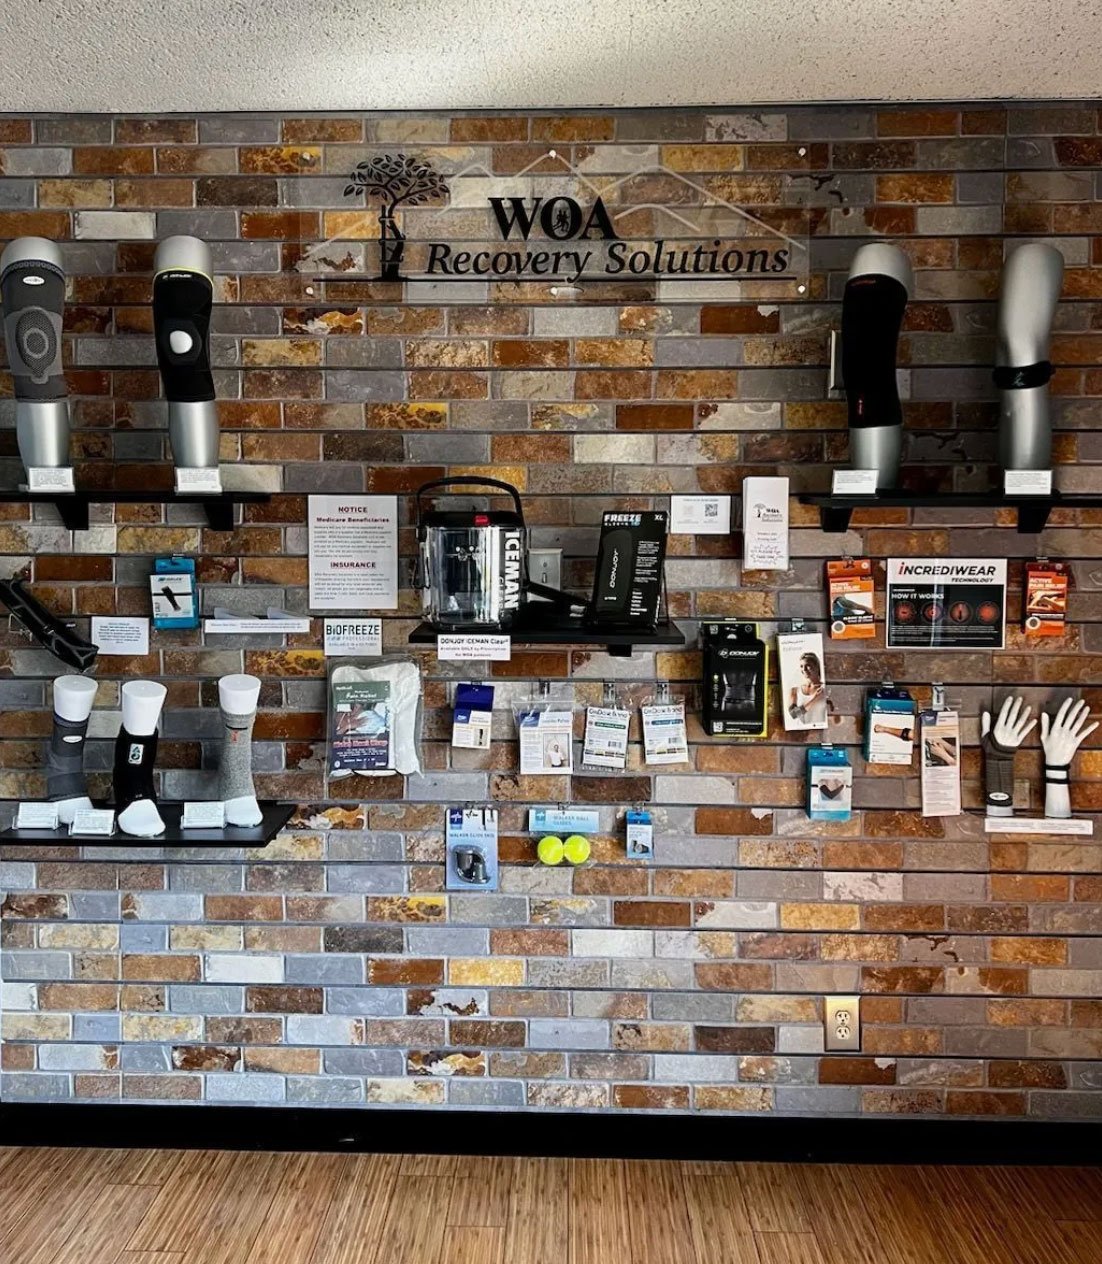 Products on display at the WOA Recovery Solutions storefront